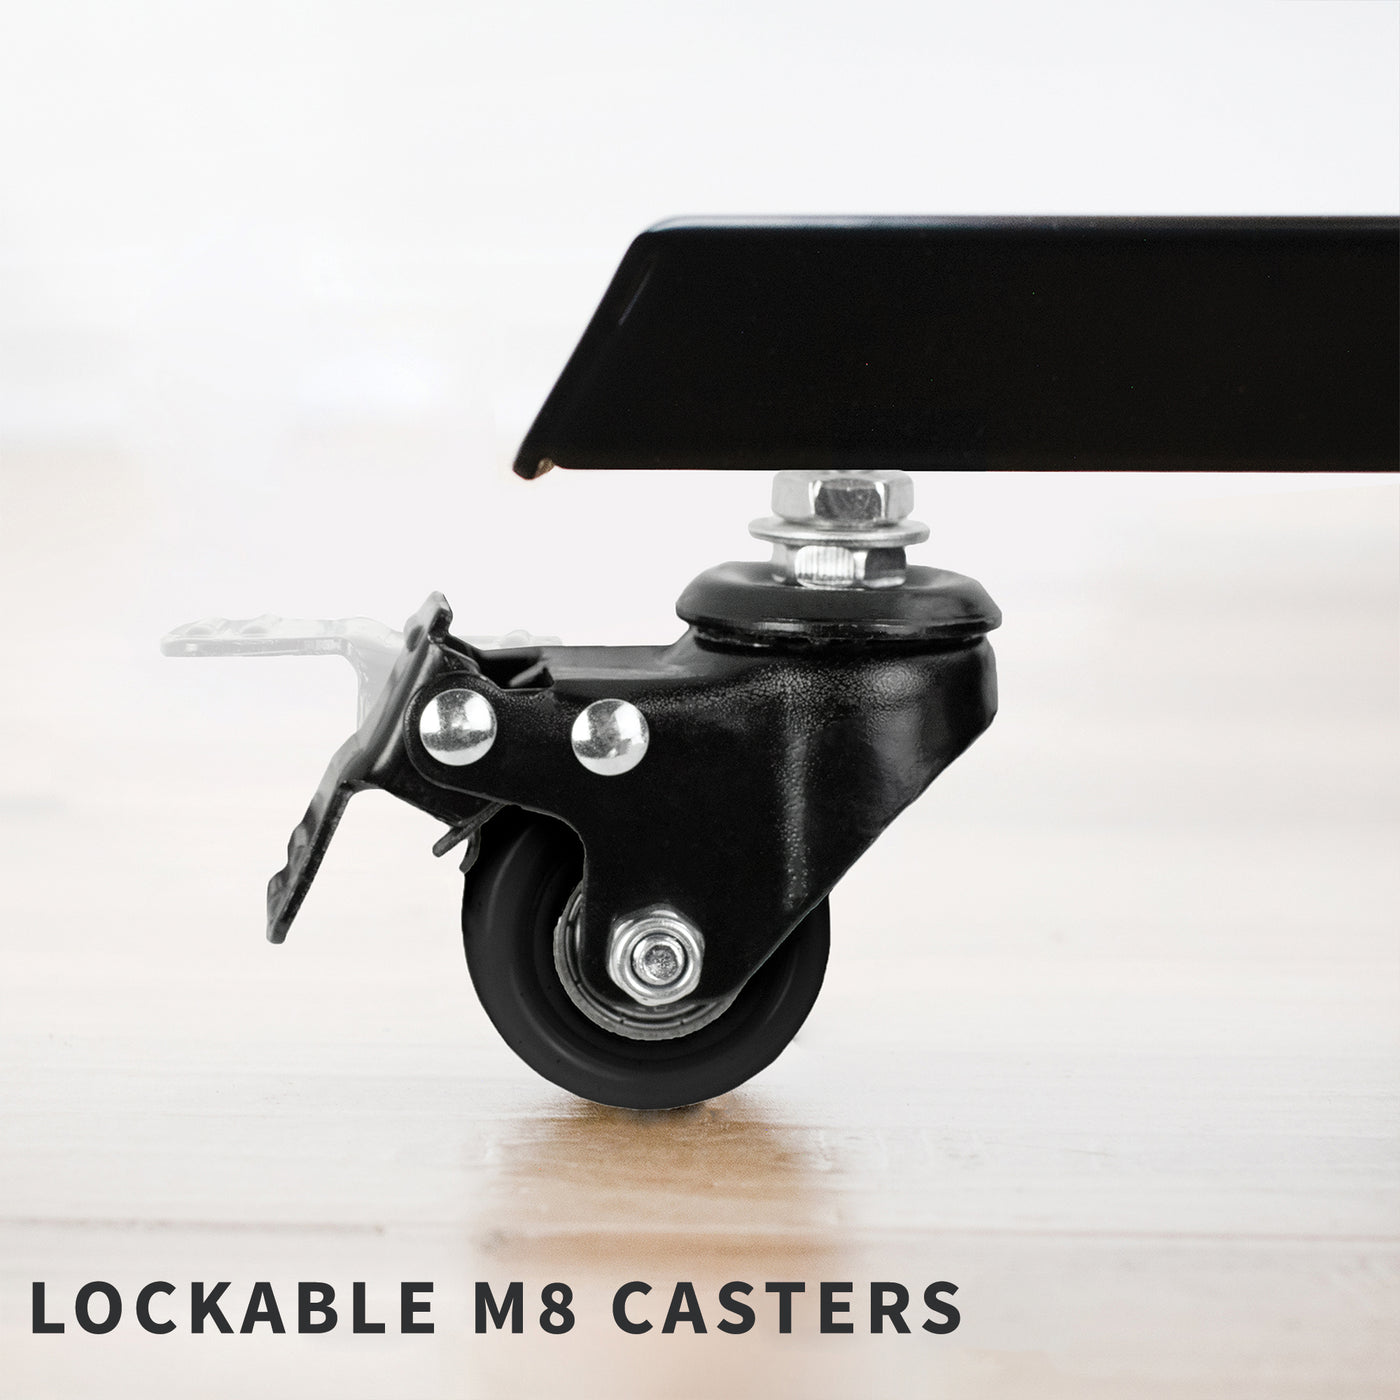 Set of caster wheels added to the bottom of an active workstation.